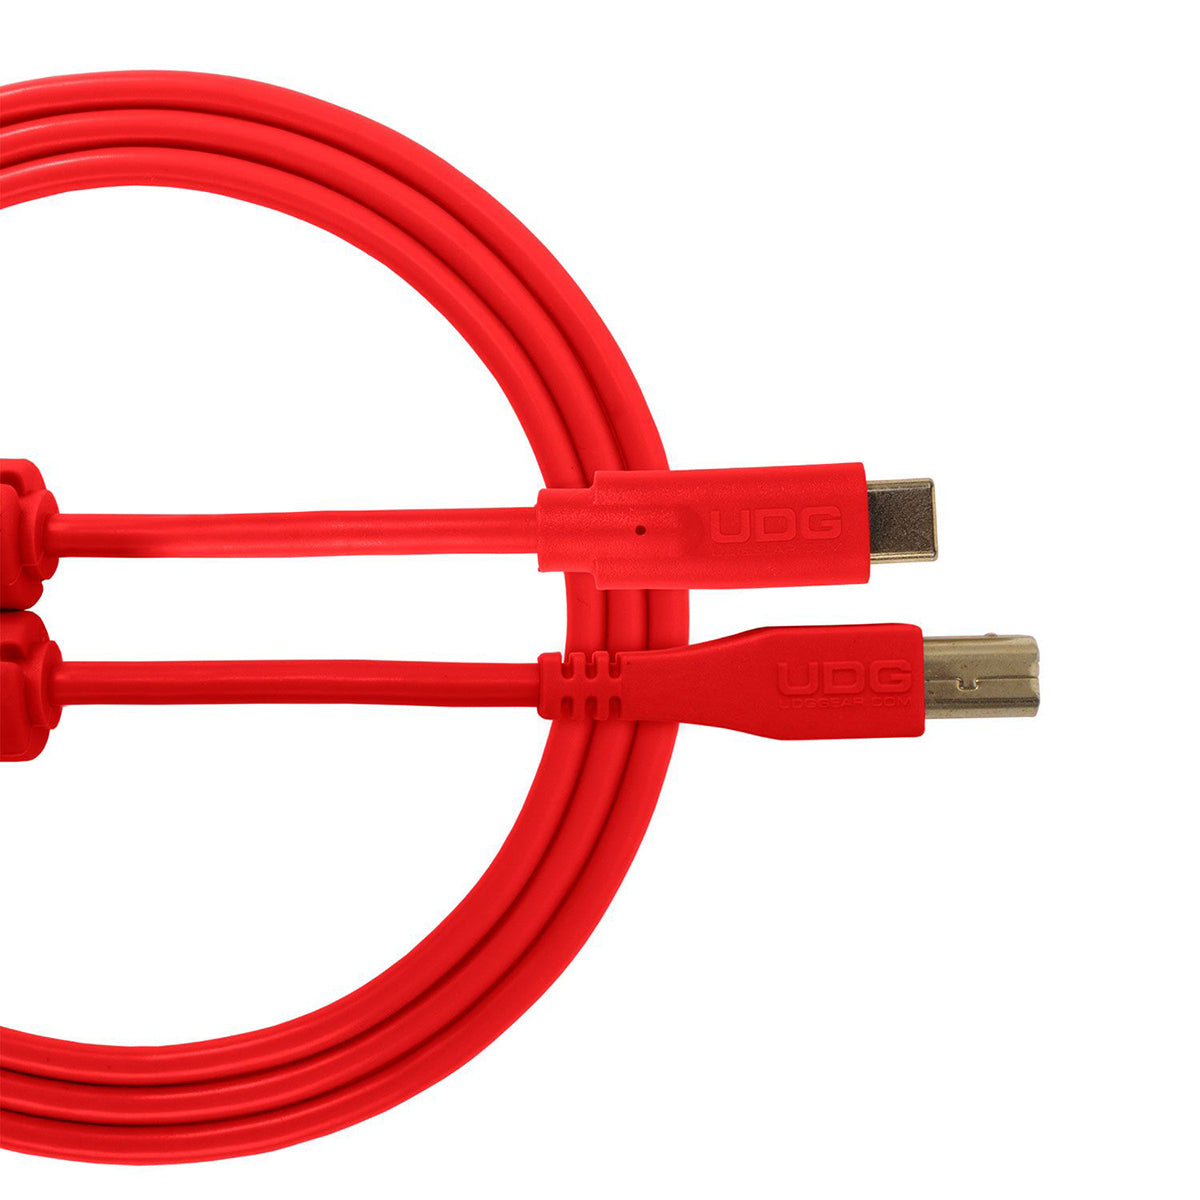 UDG USB Cable C-B 1.5m Red U96001RD